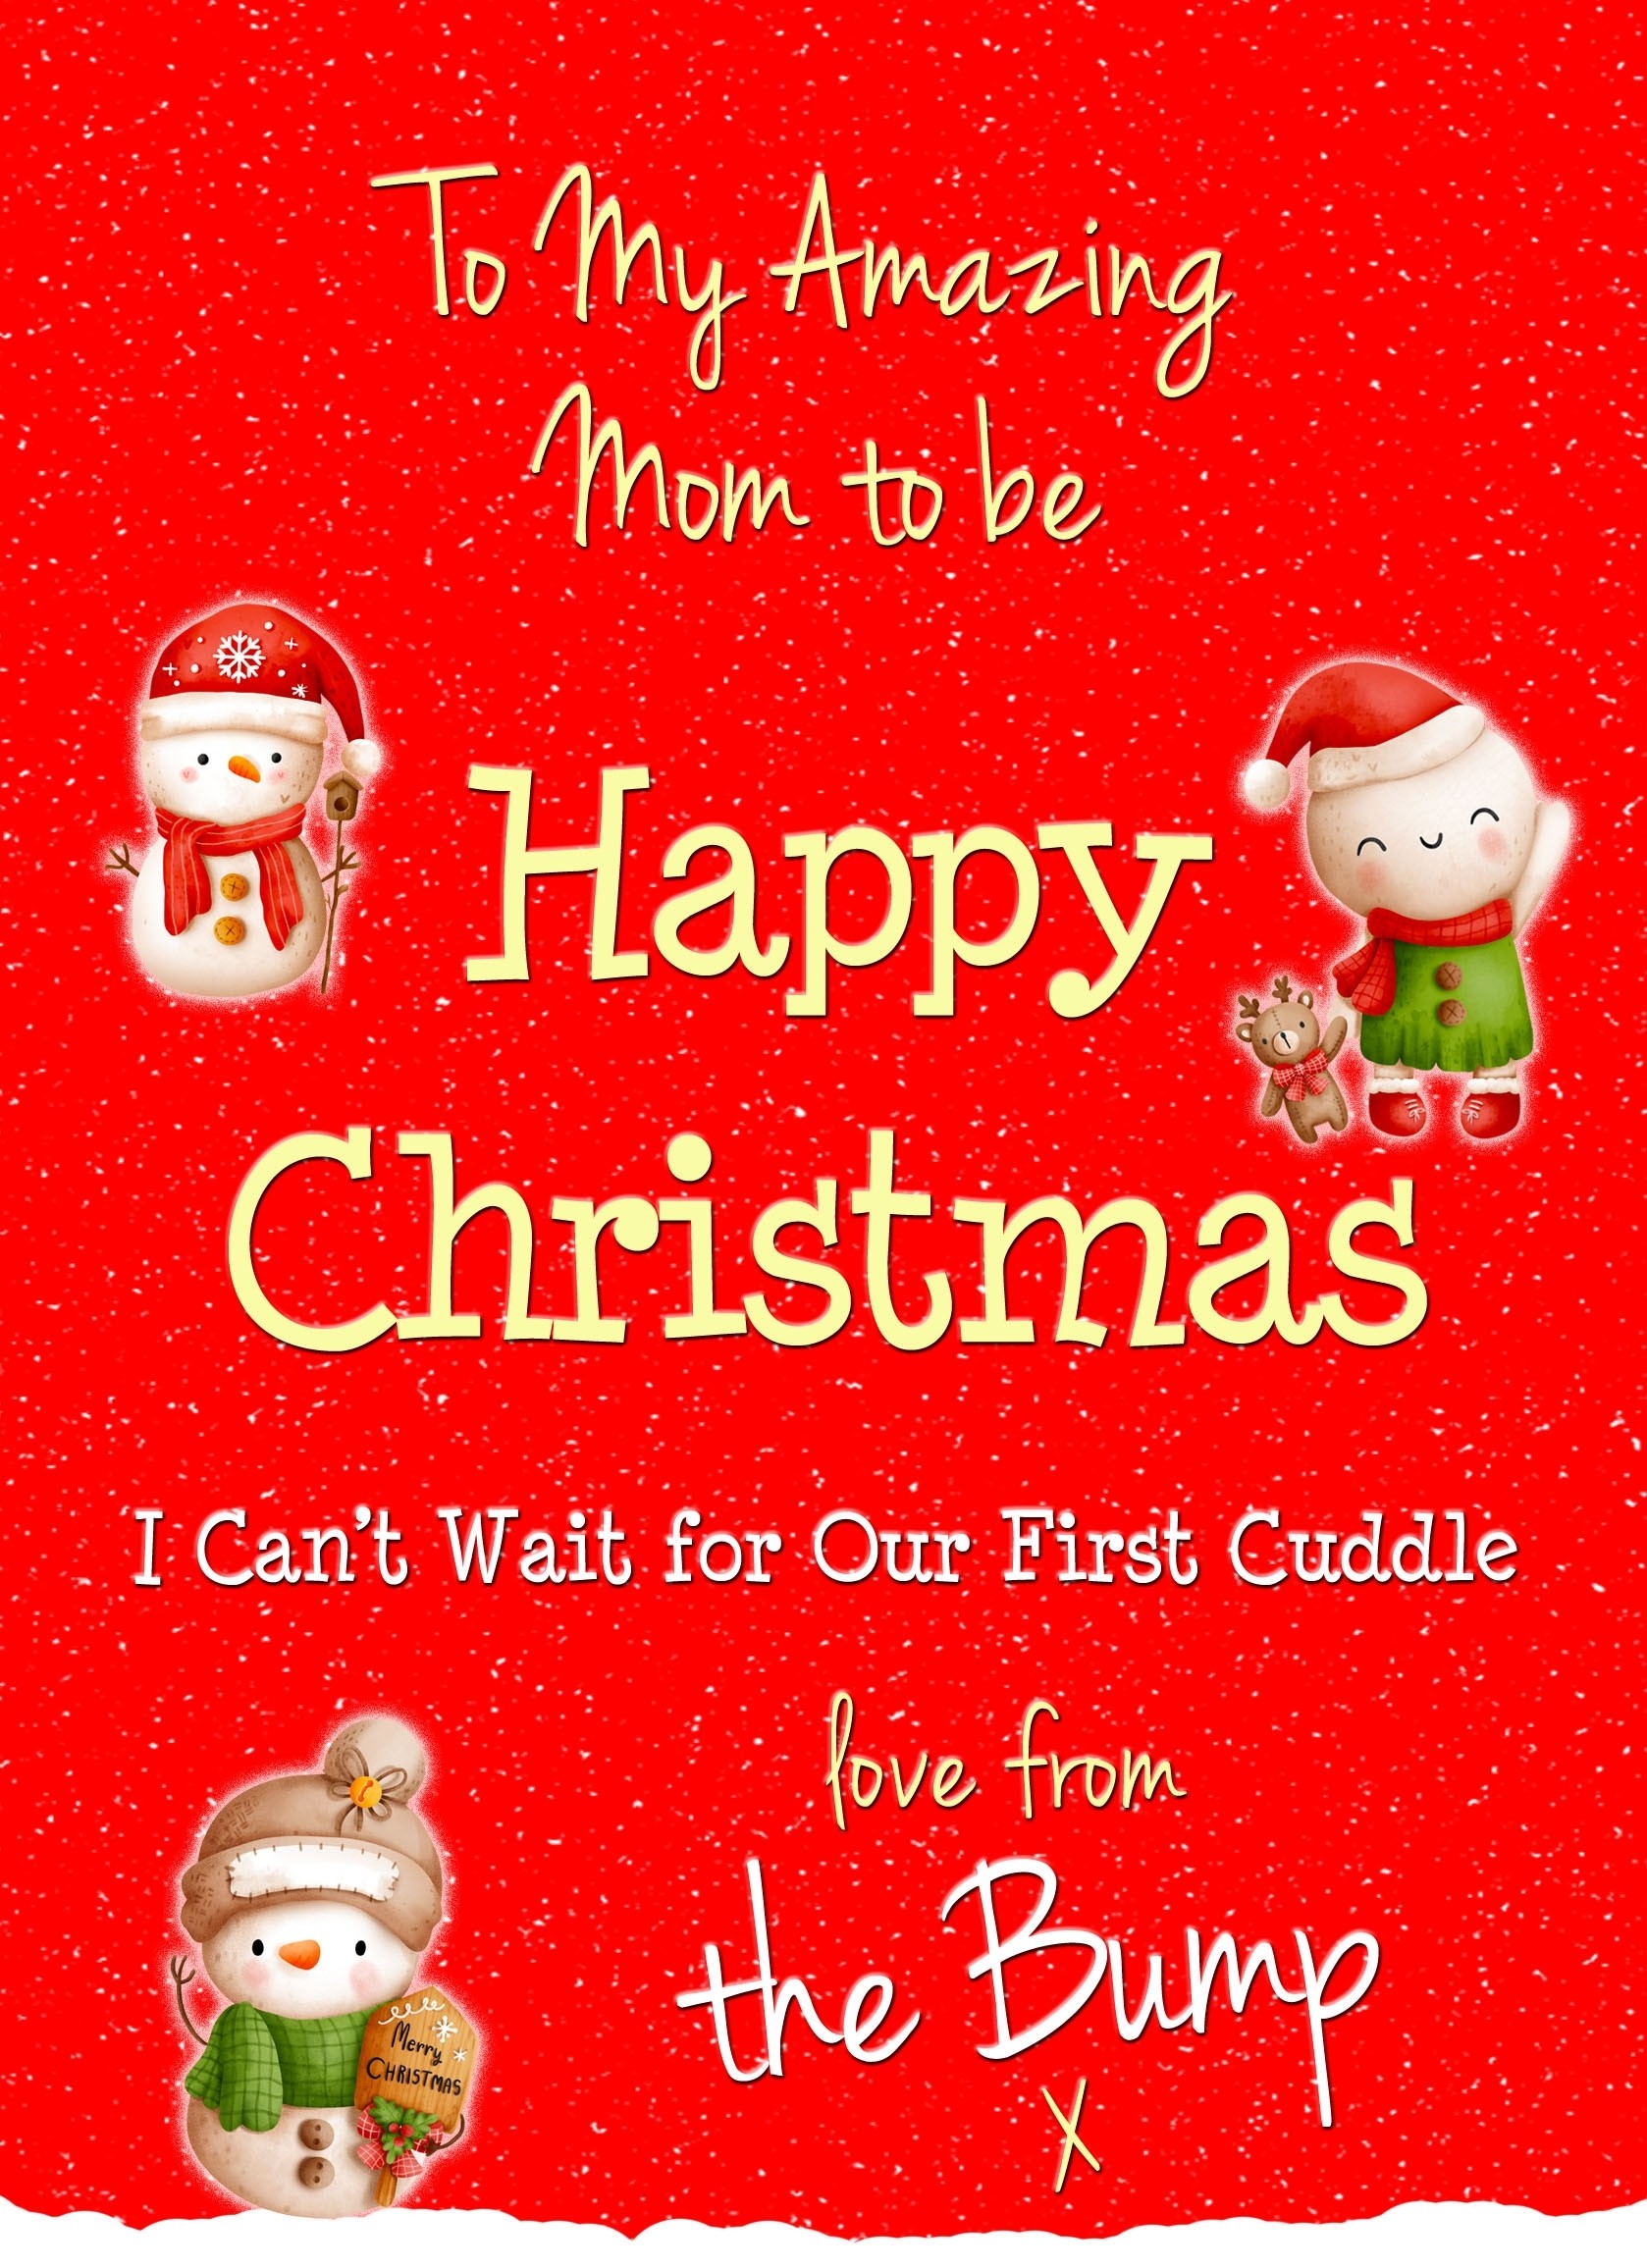 From The Bump Pregnancy Christmas Card (Mom)